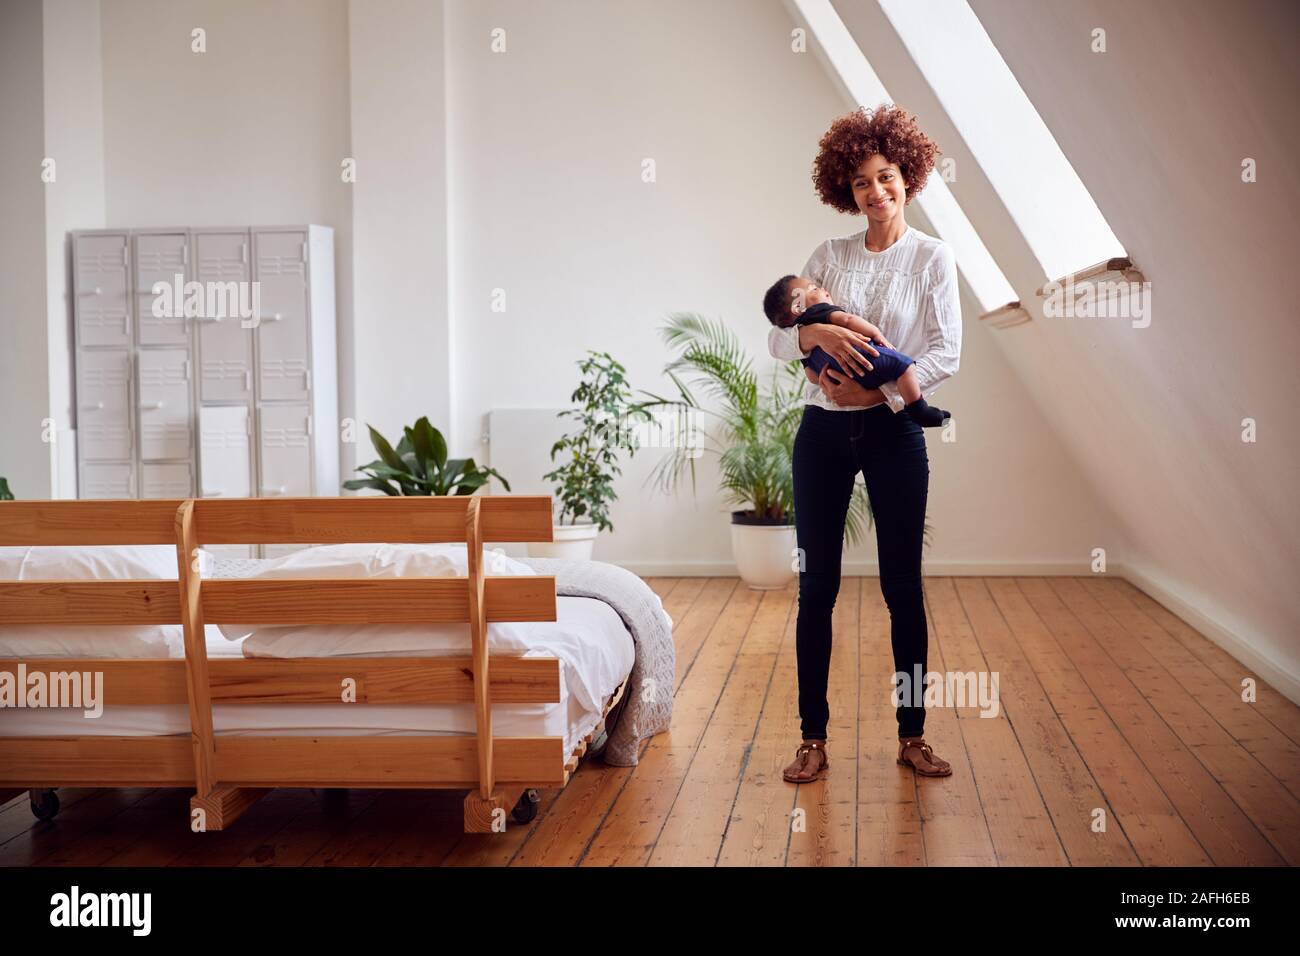 Portrait Of Loving Mother Holding Newborn Baby At Home In Loft Apartment Stock Photo